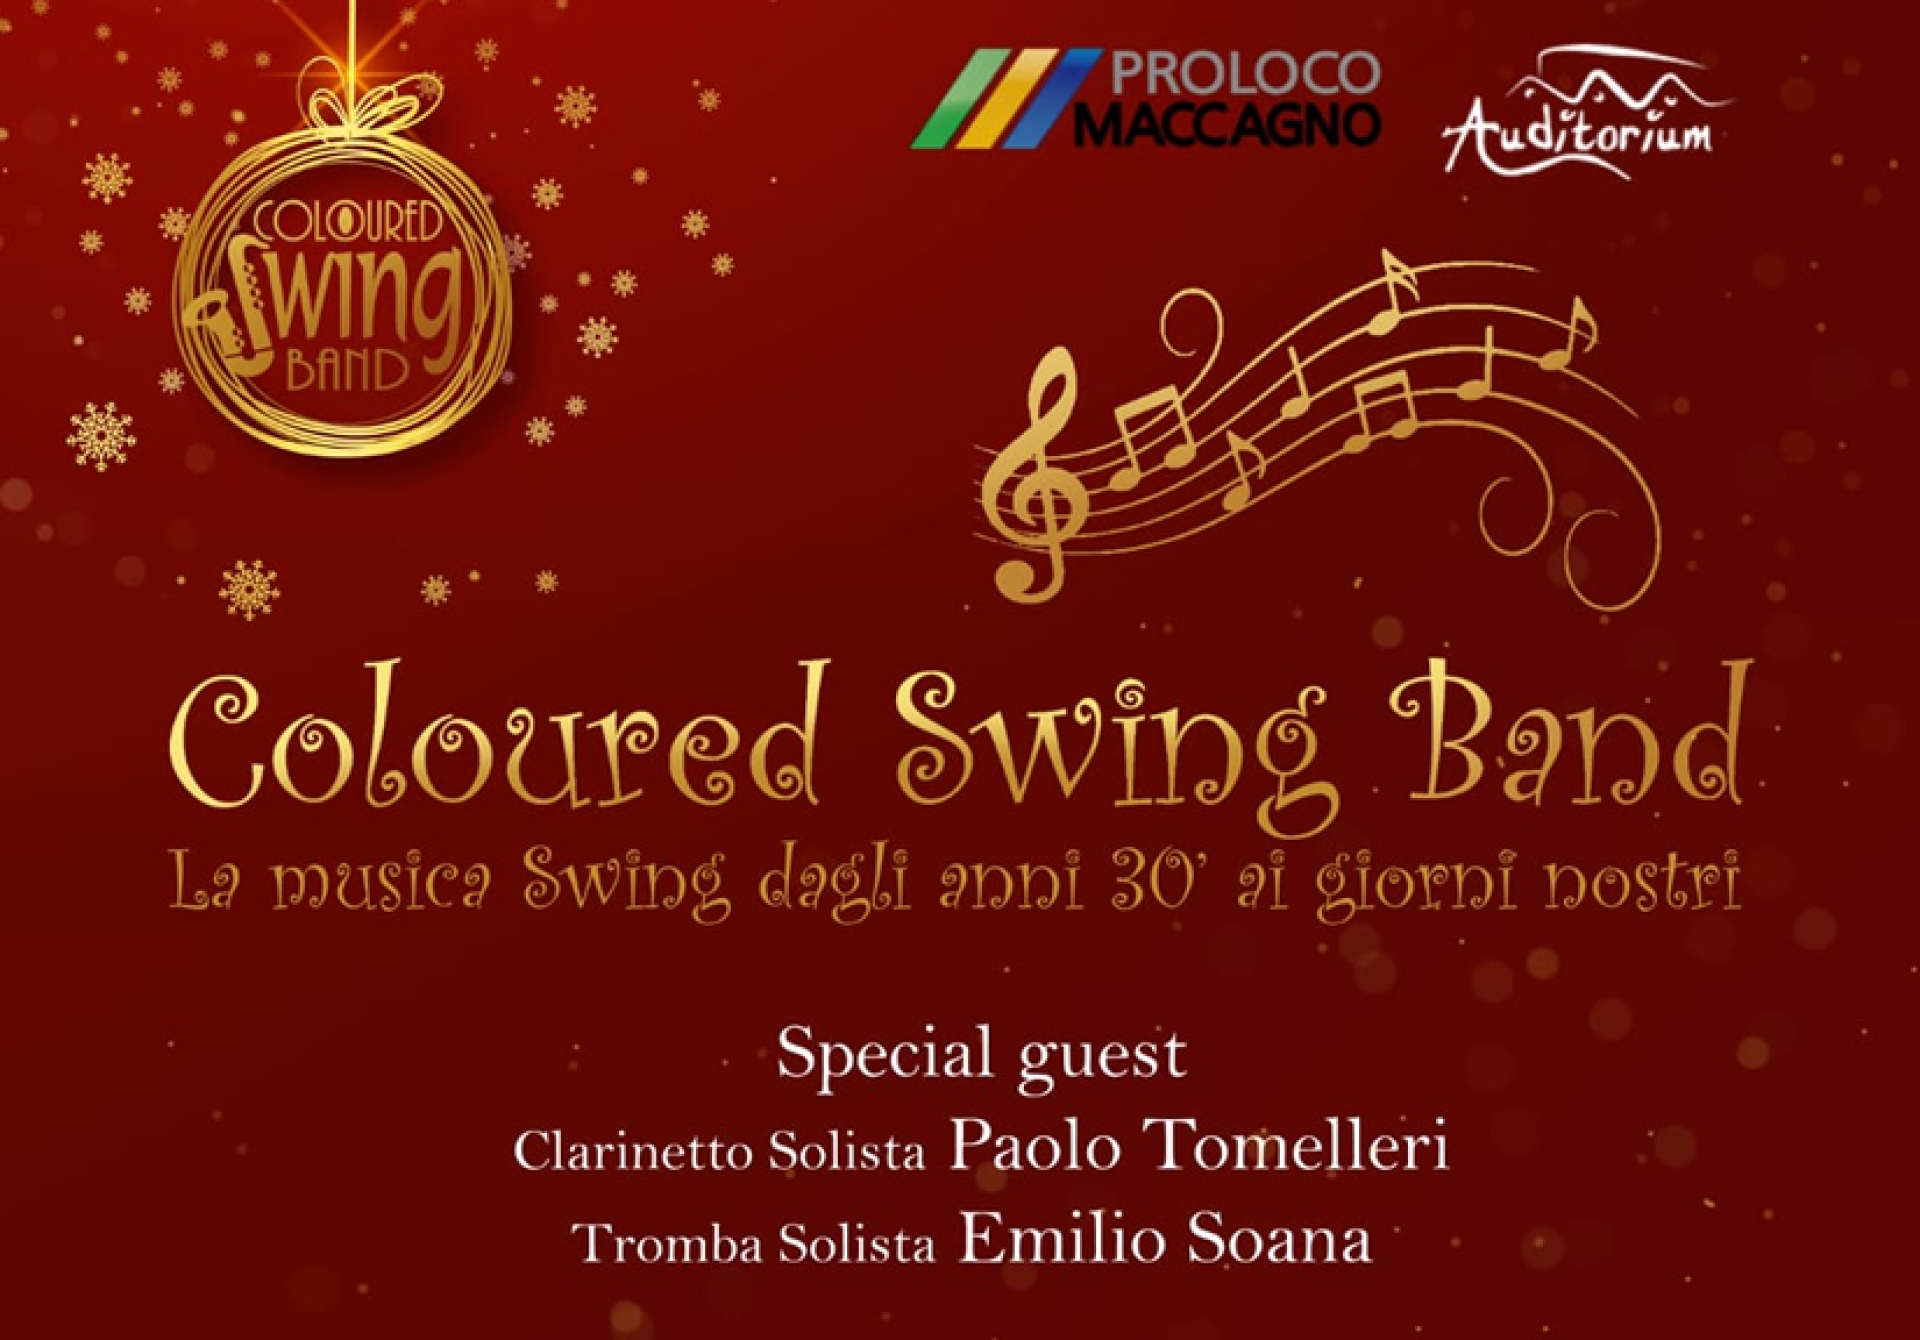 Coloured Swing Band in concerto